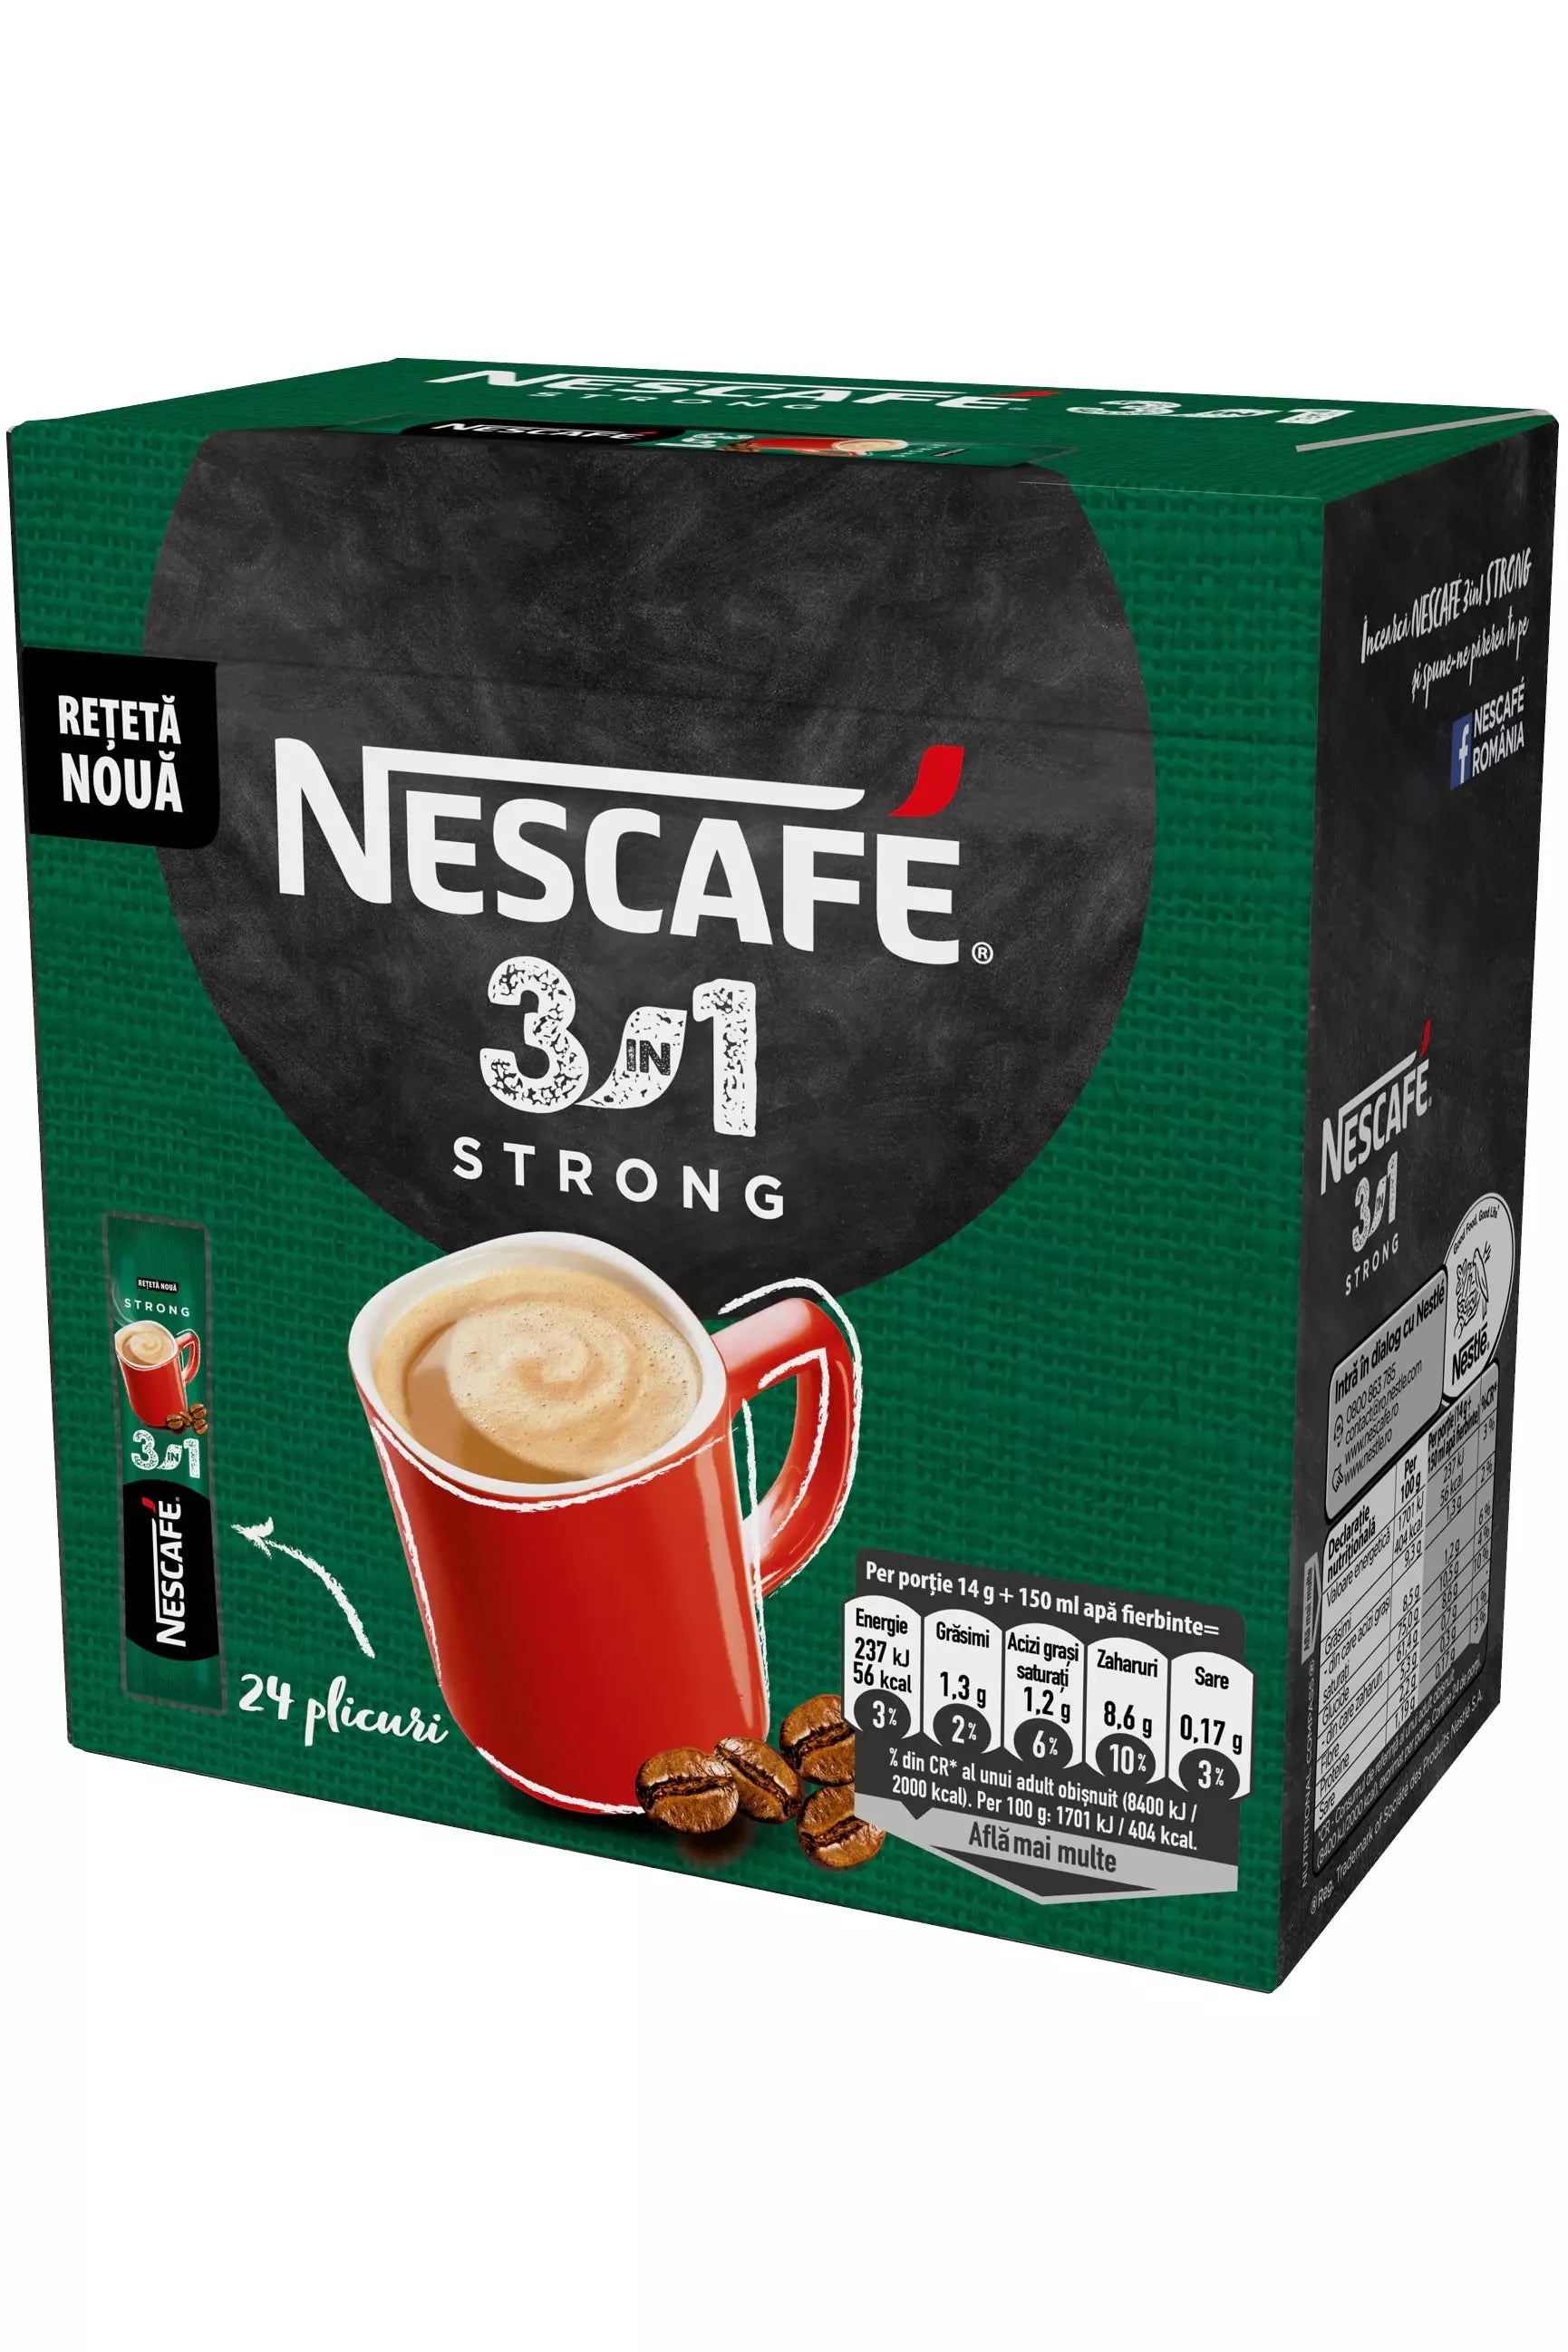 Nescafe 3 in 1 Coffee and Creamer Strong Coffee Packs 10 pack 170g 